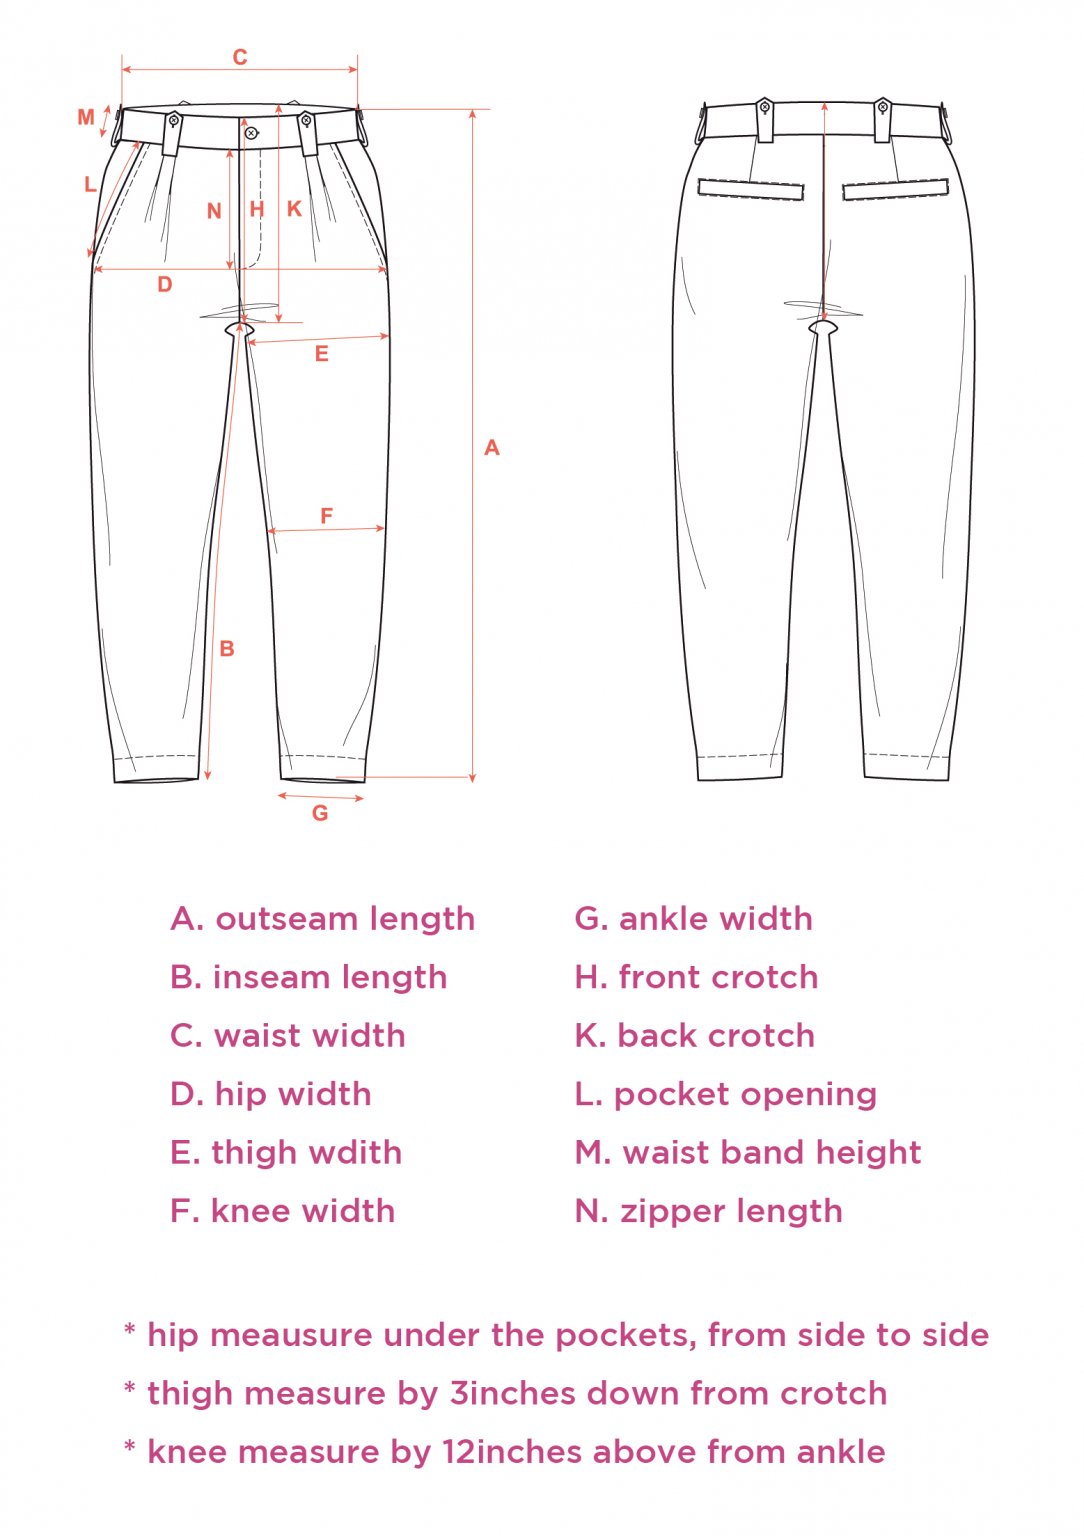 How to Measure Your Body for Clothing Sizes 丨 Lezhou Garment